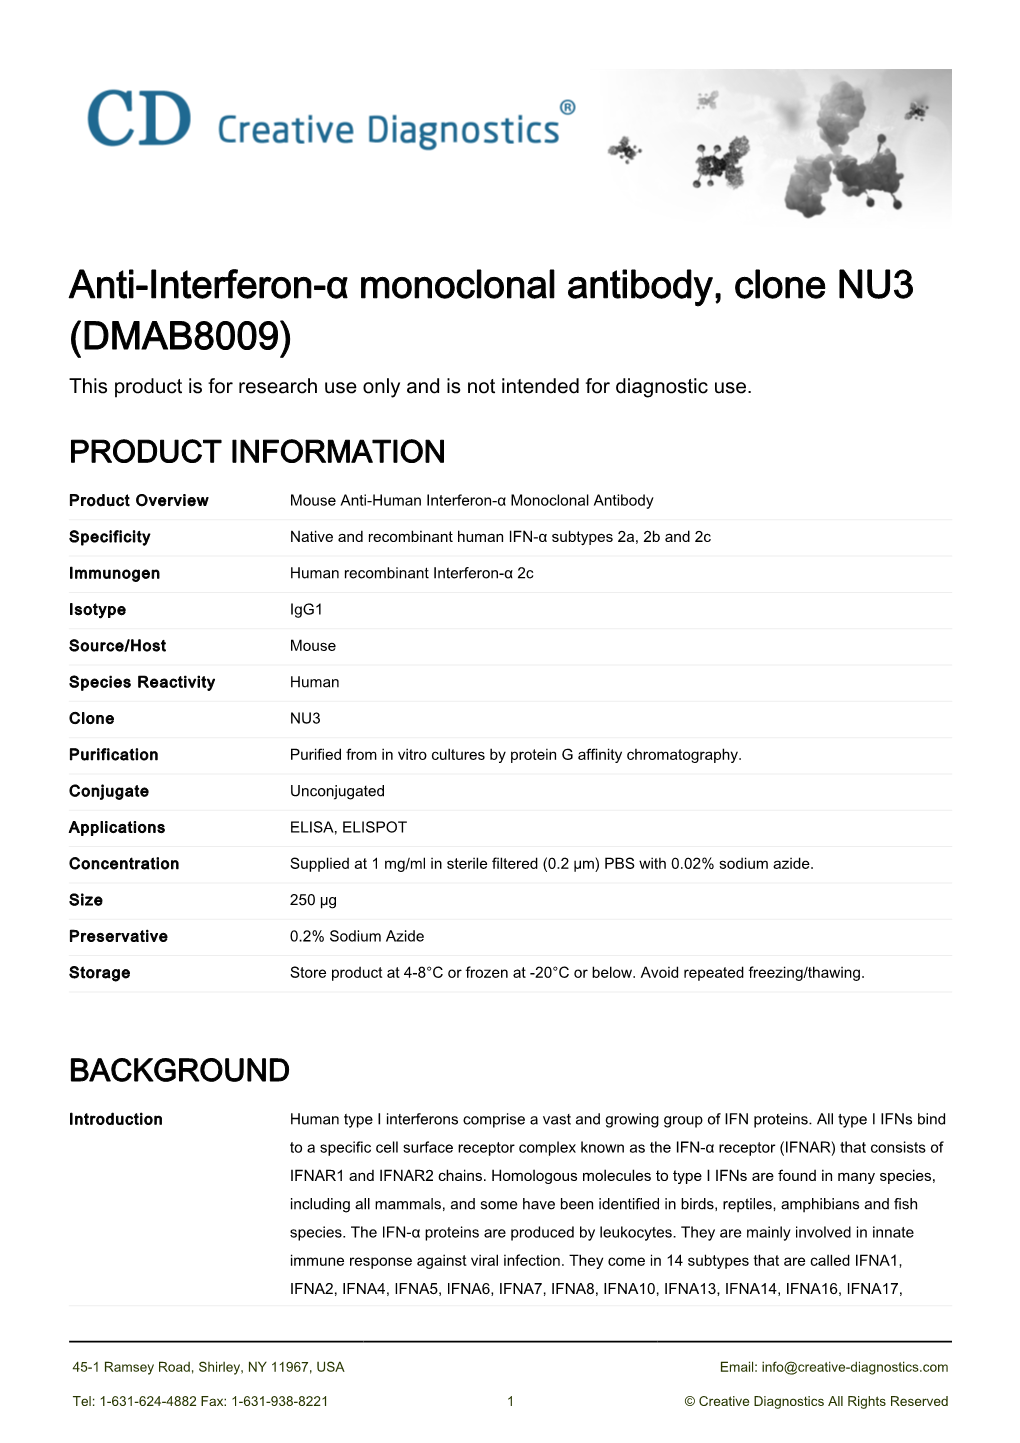 Anti-Interferon-Α Monoclonal Antibody, Clone NU3 (DMAB8009) This Product Is for Research Use Only and Is Not Intended for Diagnostic Use